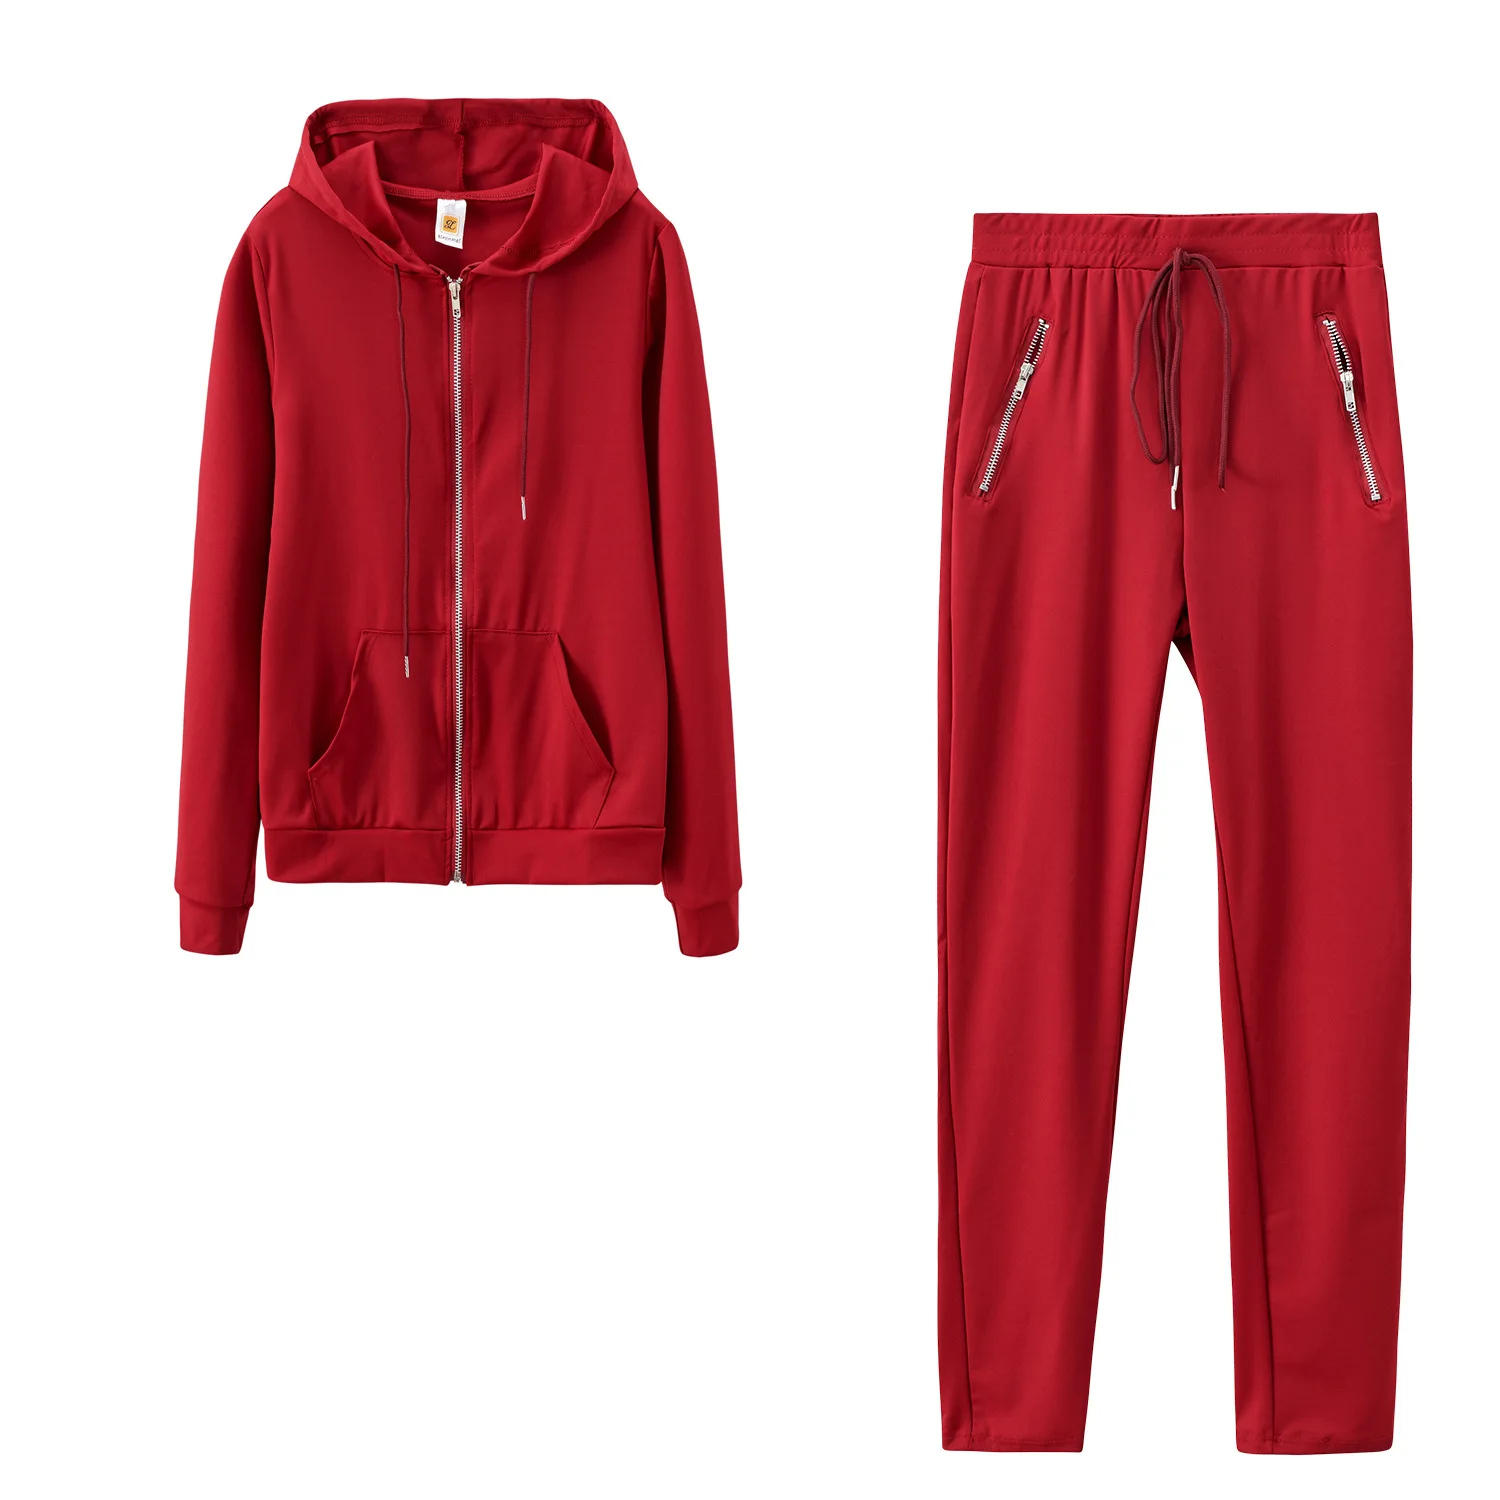 Spring 2022 European and American women's fashion sports casual solid color suit personalized zipper pocket two-piece set custom hoodies